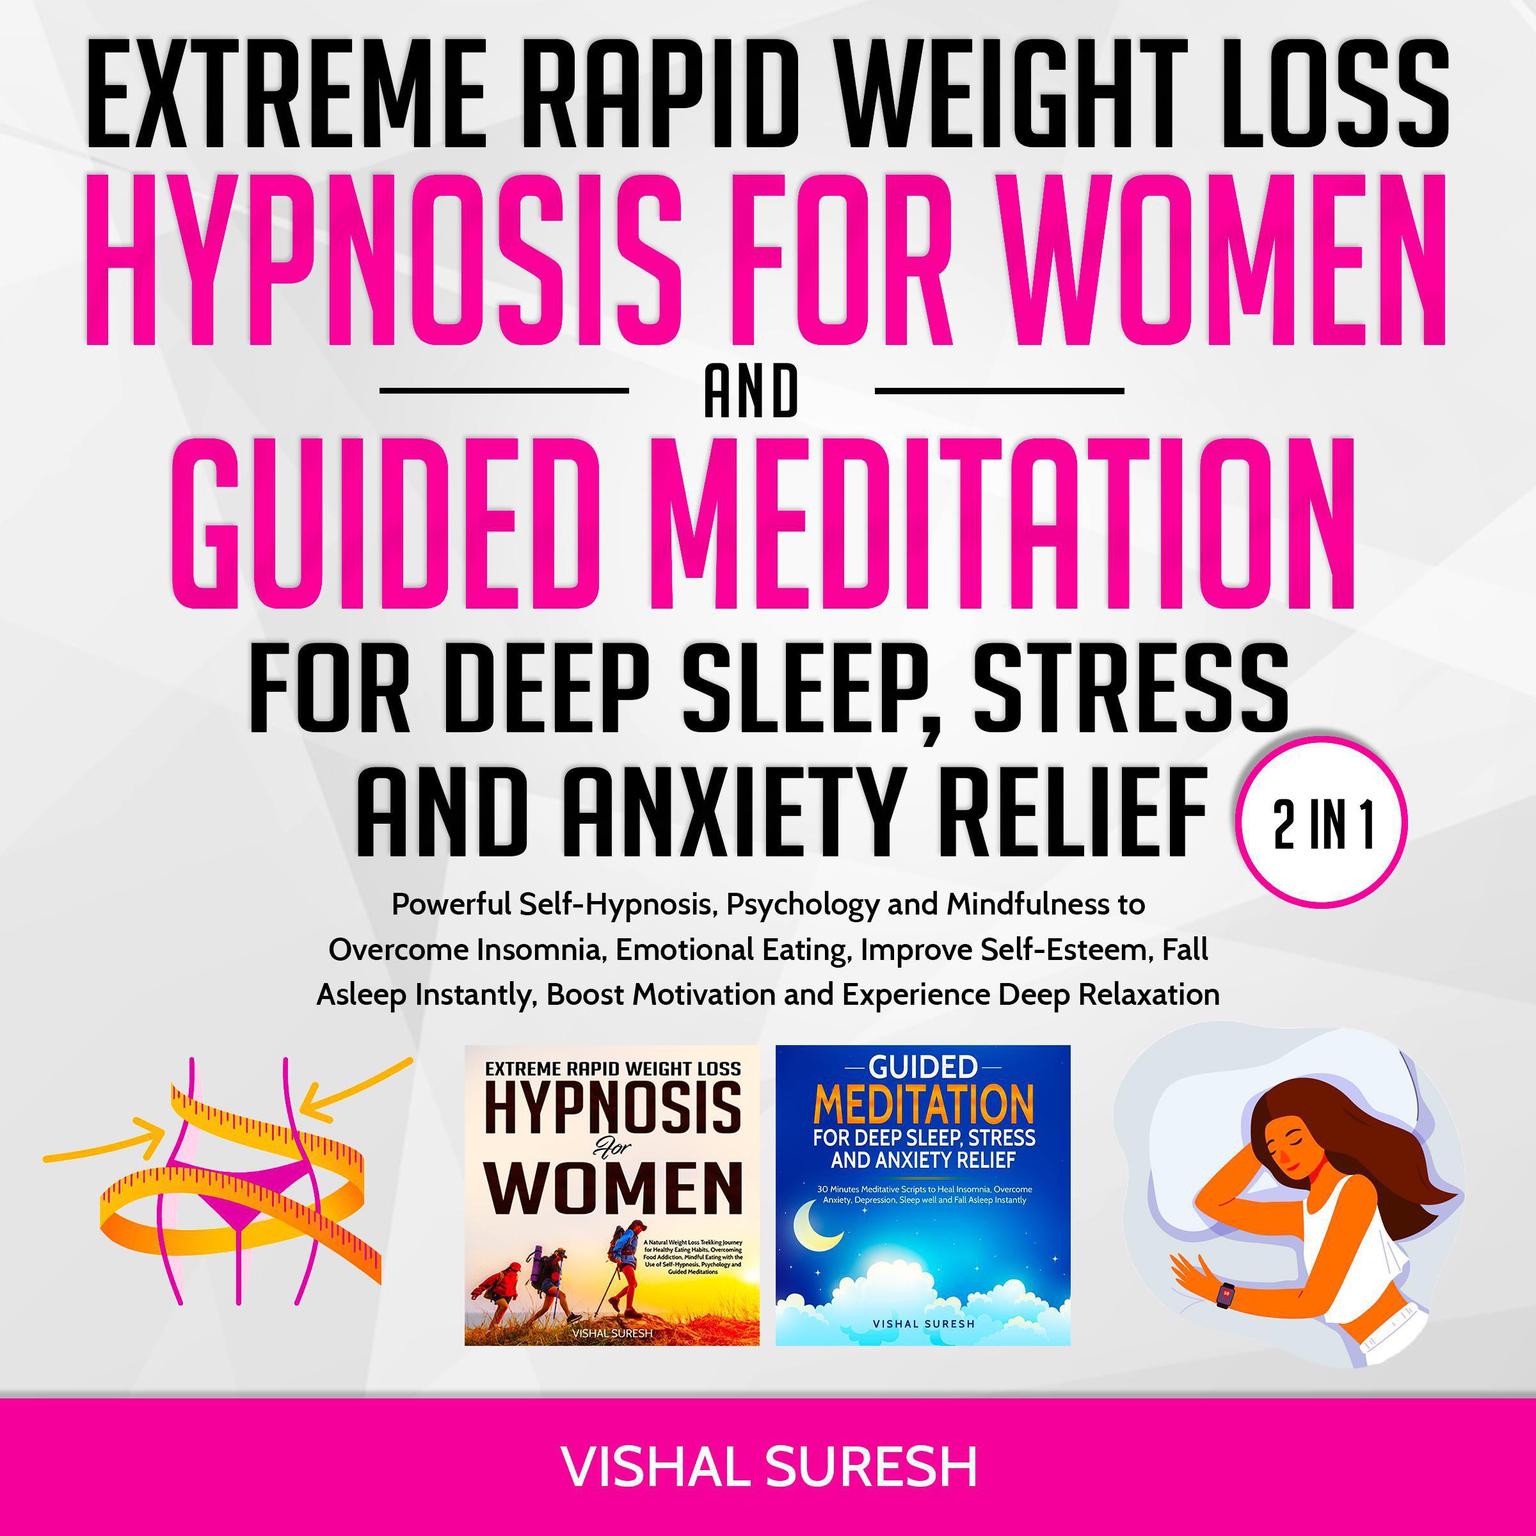 Extreme Rapid Weight Loss Hypnosis for Women and Guided Meditation for Deep Sleep, Stress and Anxiety Relief 2 in 1: Powerful Self-Hypnosis, Psychology and Mindfulness to Overcome Insomnia, Emotional Eating, Improve Self-Esteem, Fall Asleep Instantly, Boost Motivation and Experience Deep Relaxation Audiobook, by Vishal Suresh